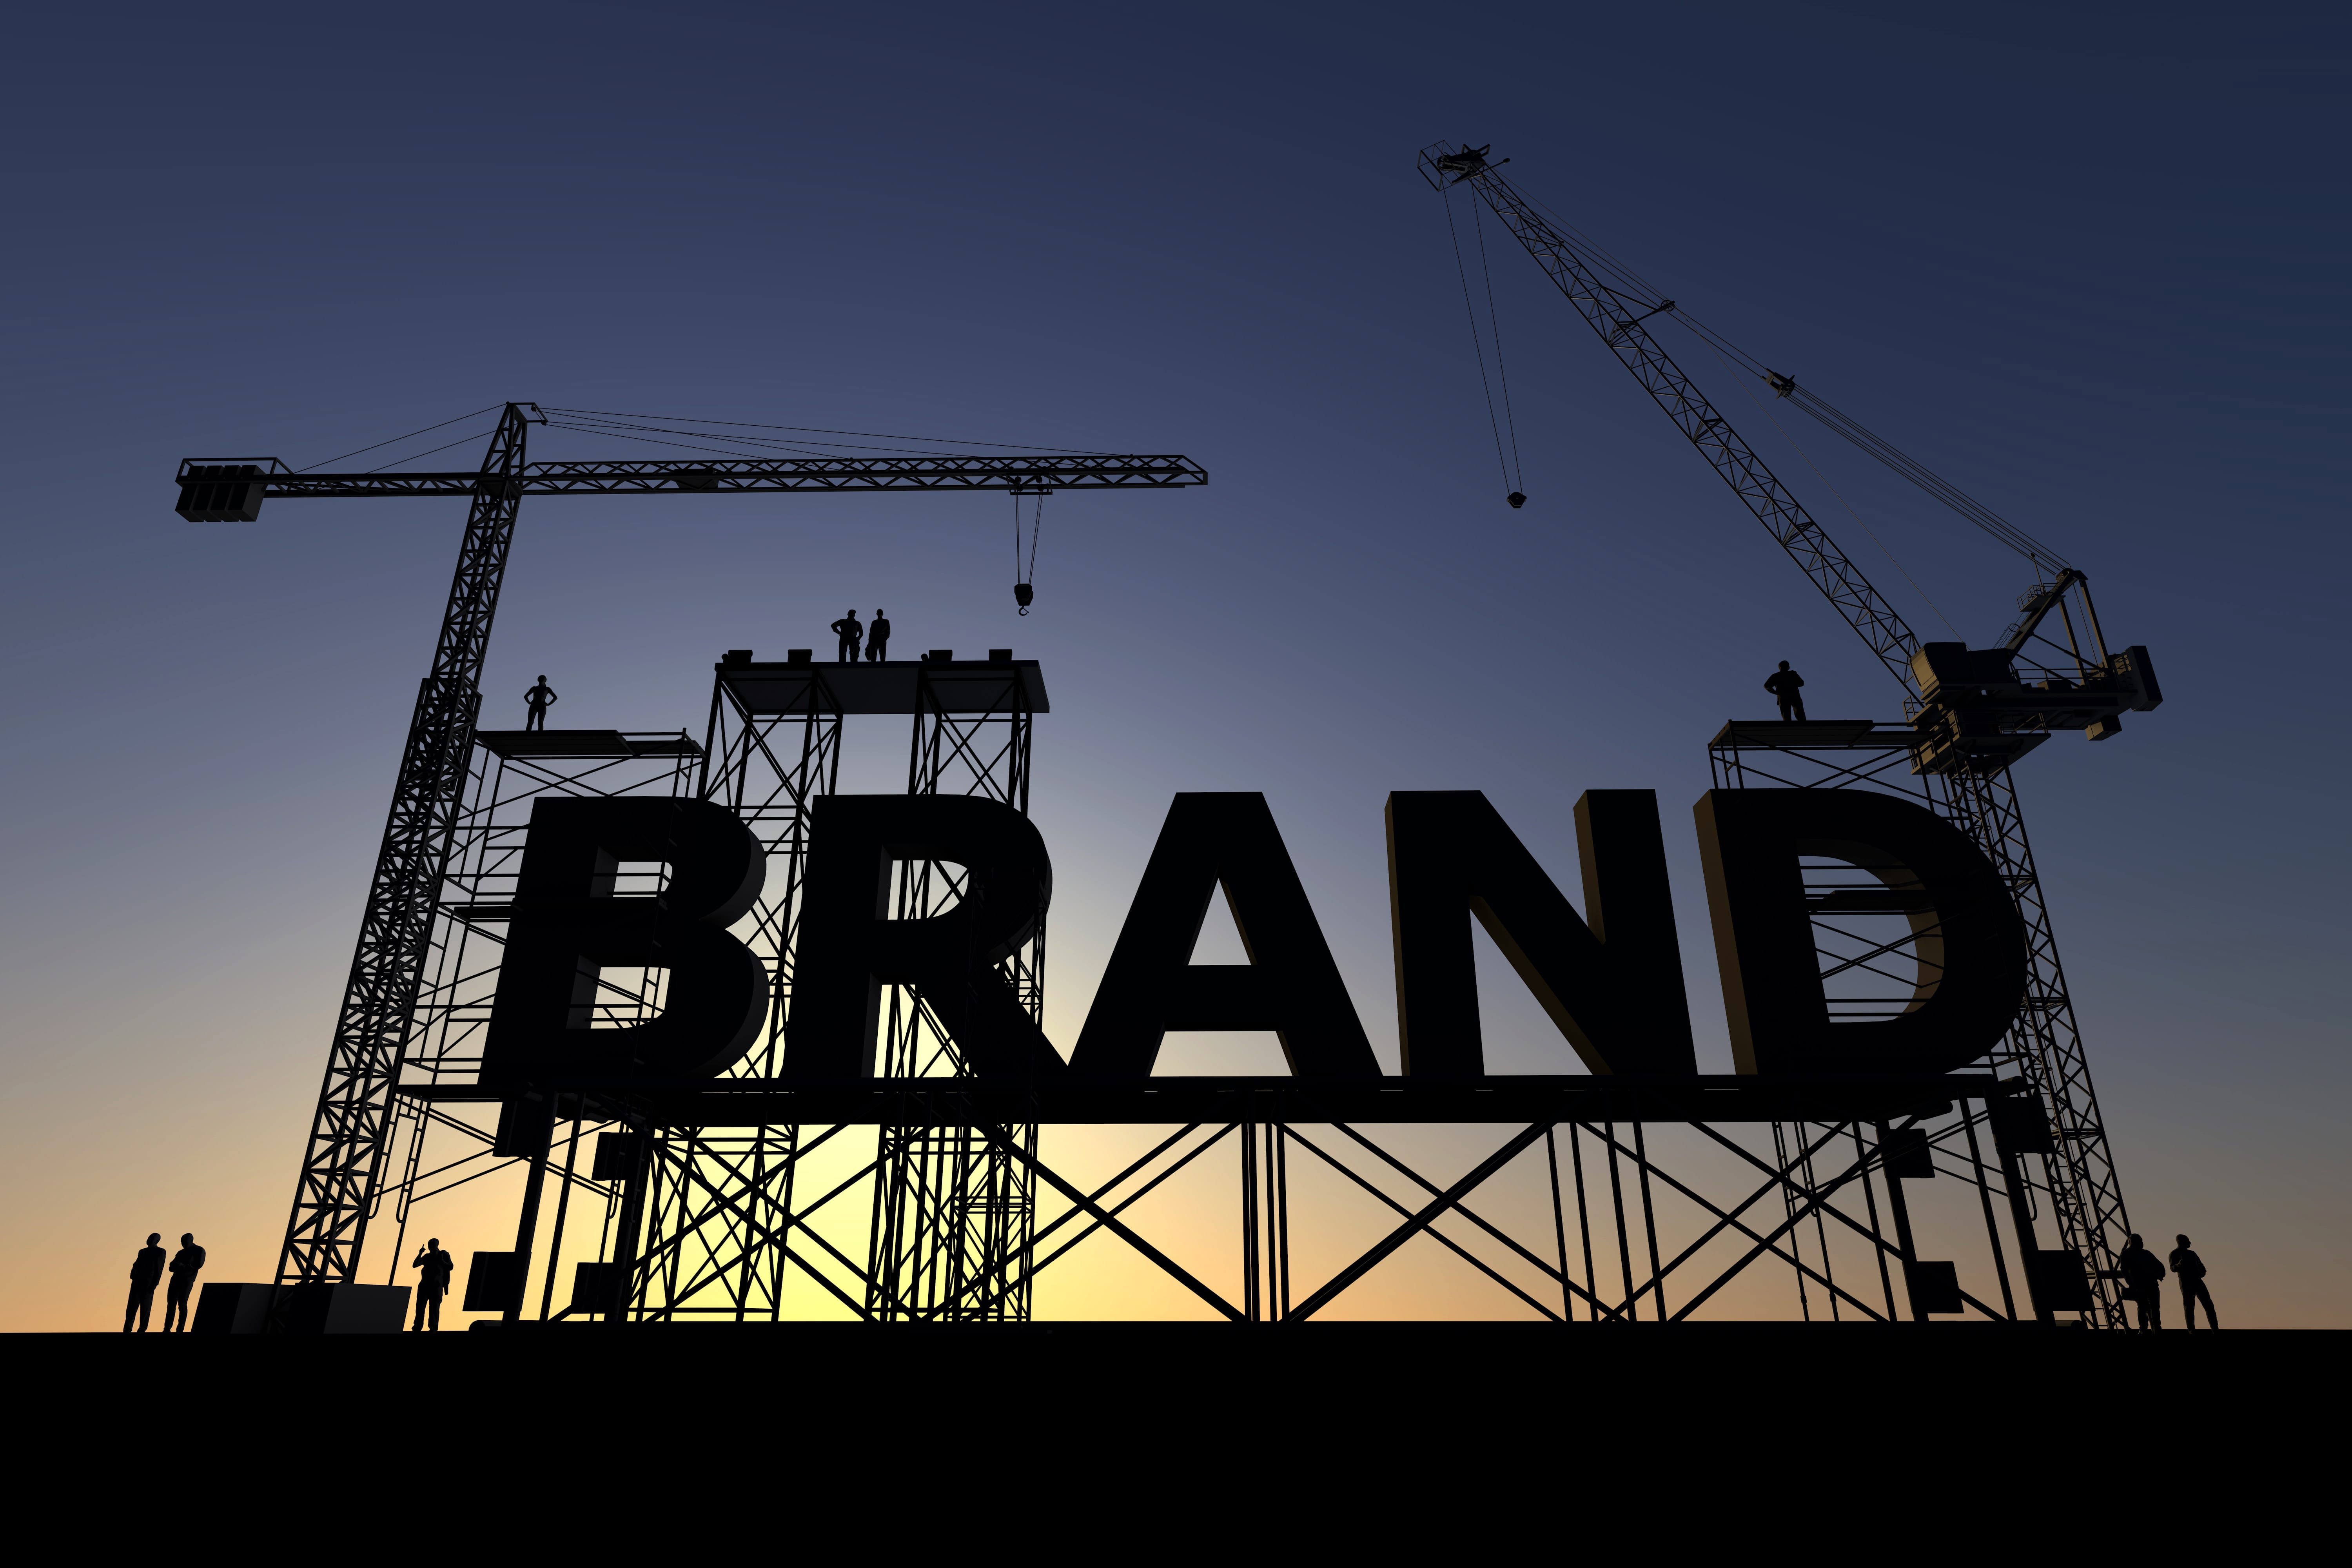 Brand Management: A Career to Consider